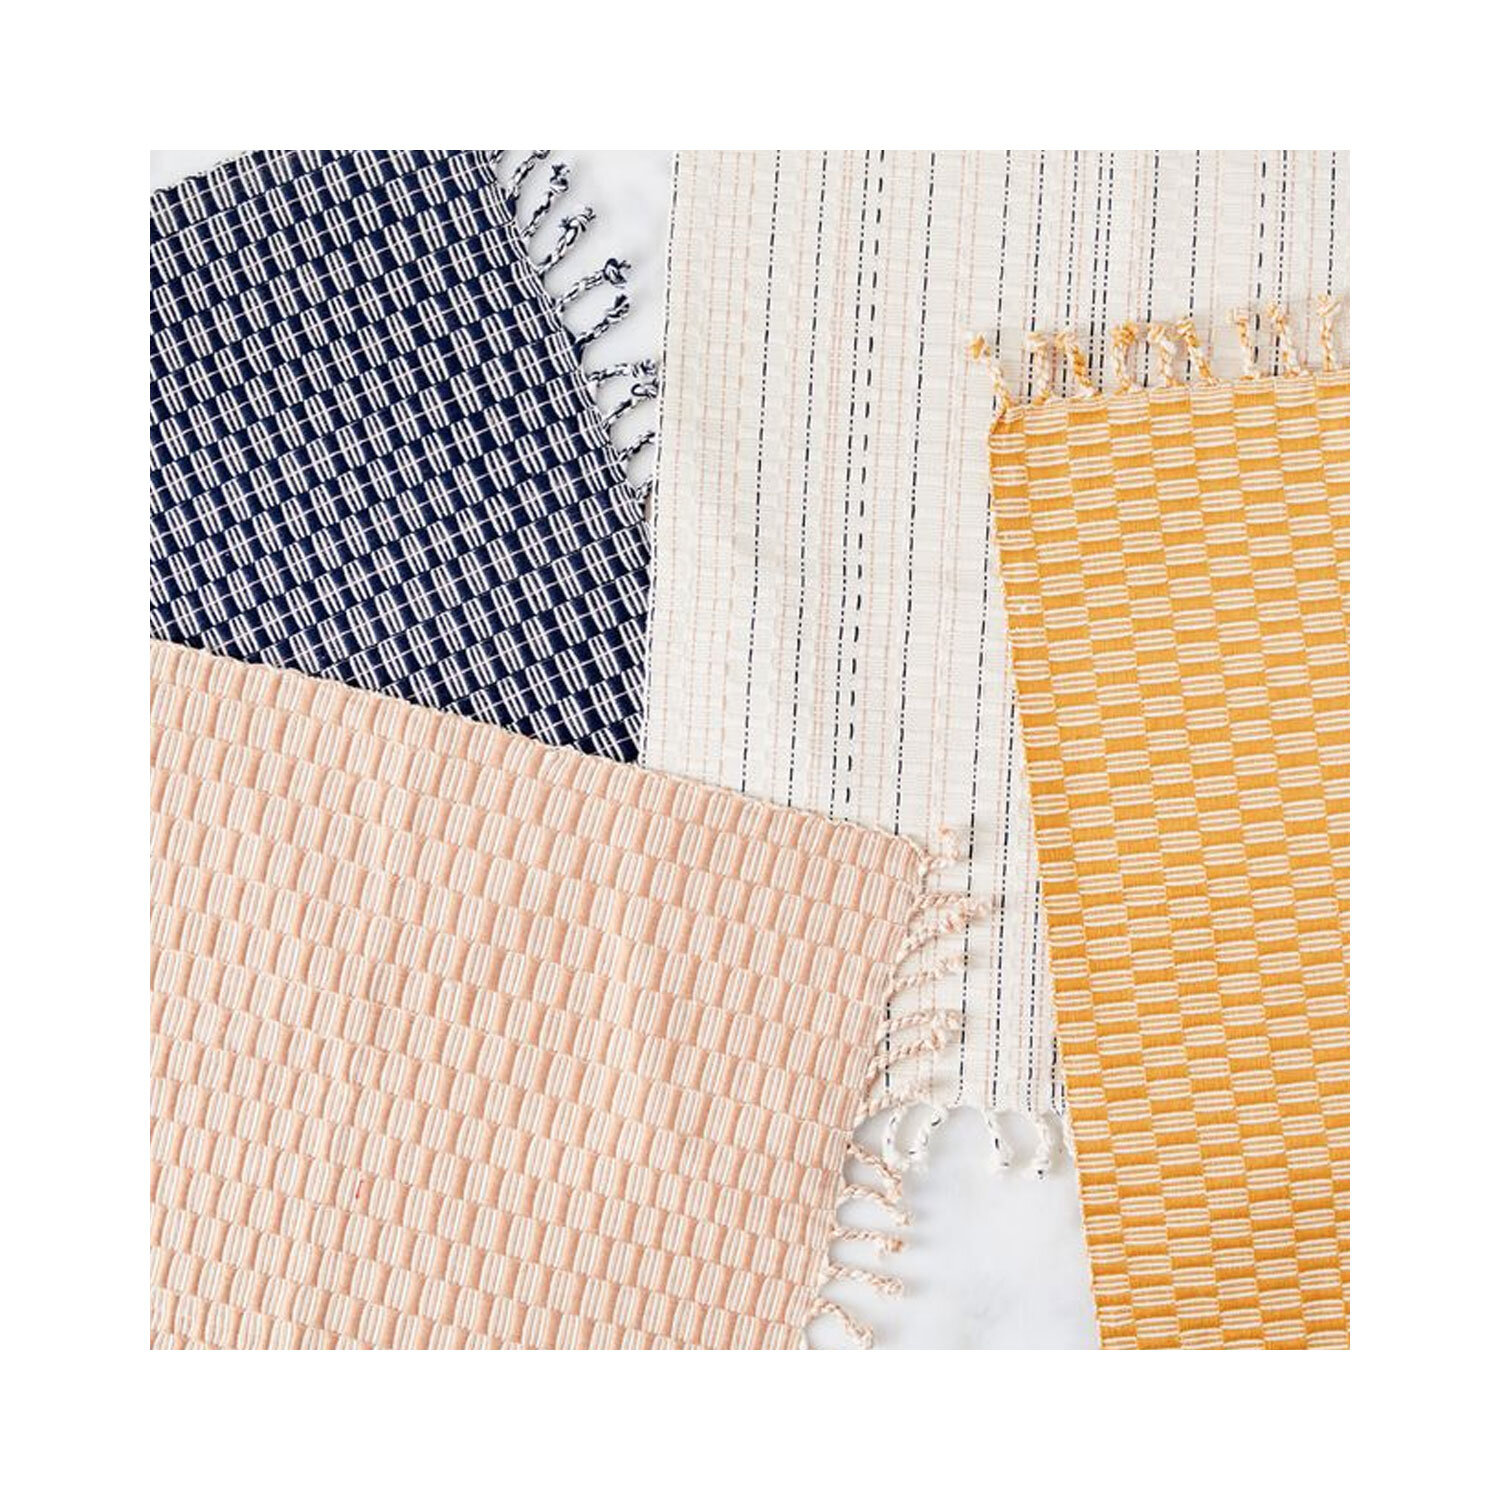 Handwoven Panalito Placemats by MINNA